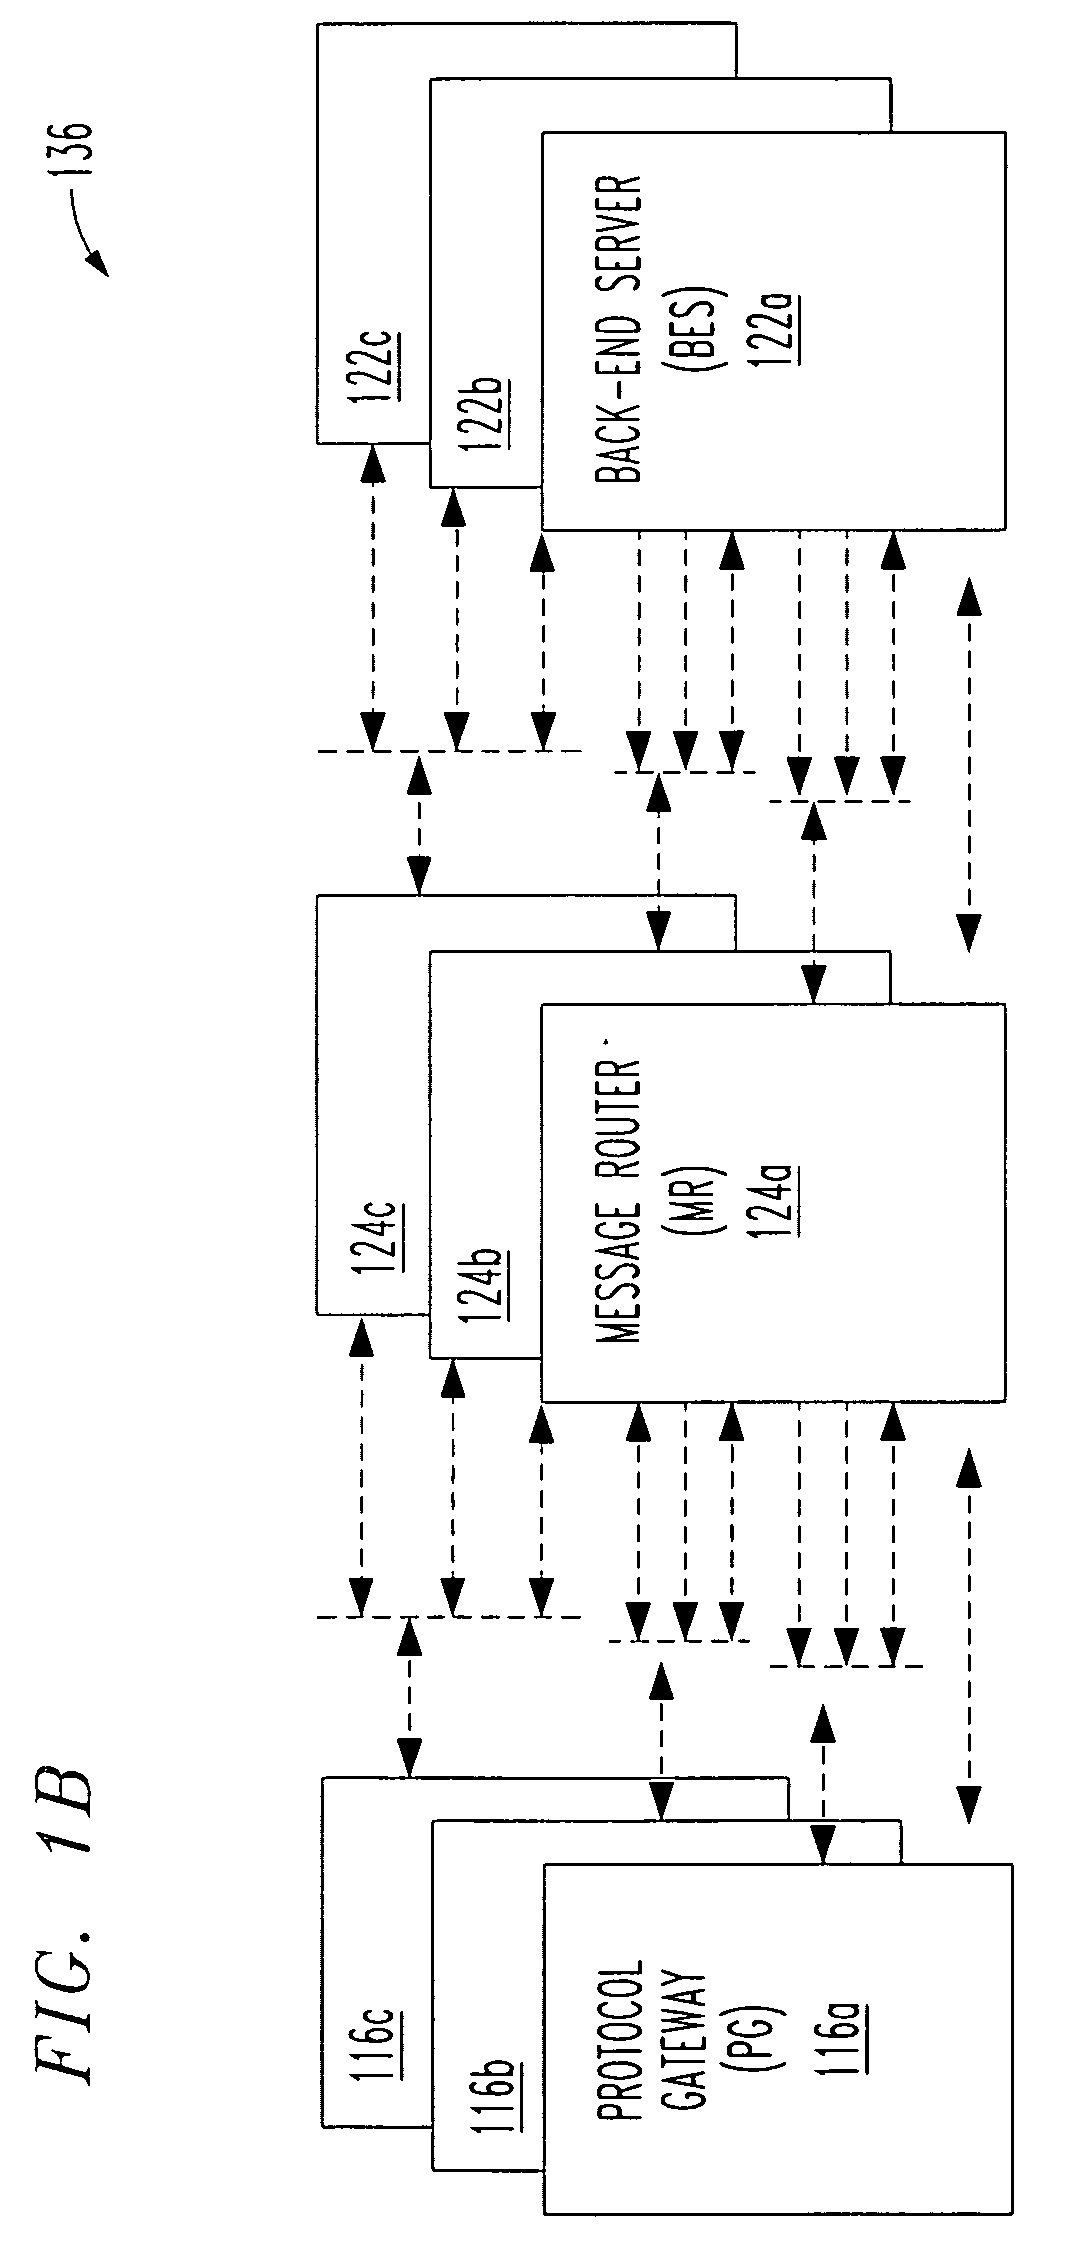 System and method for re-directing requests from browsers for communications over non-IP based networks